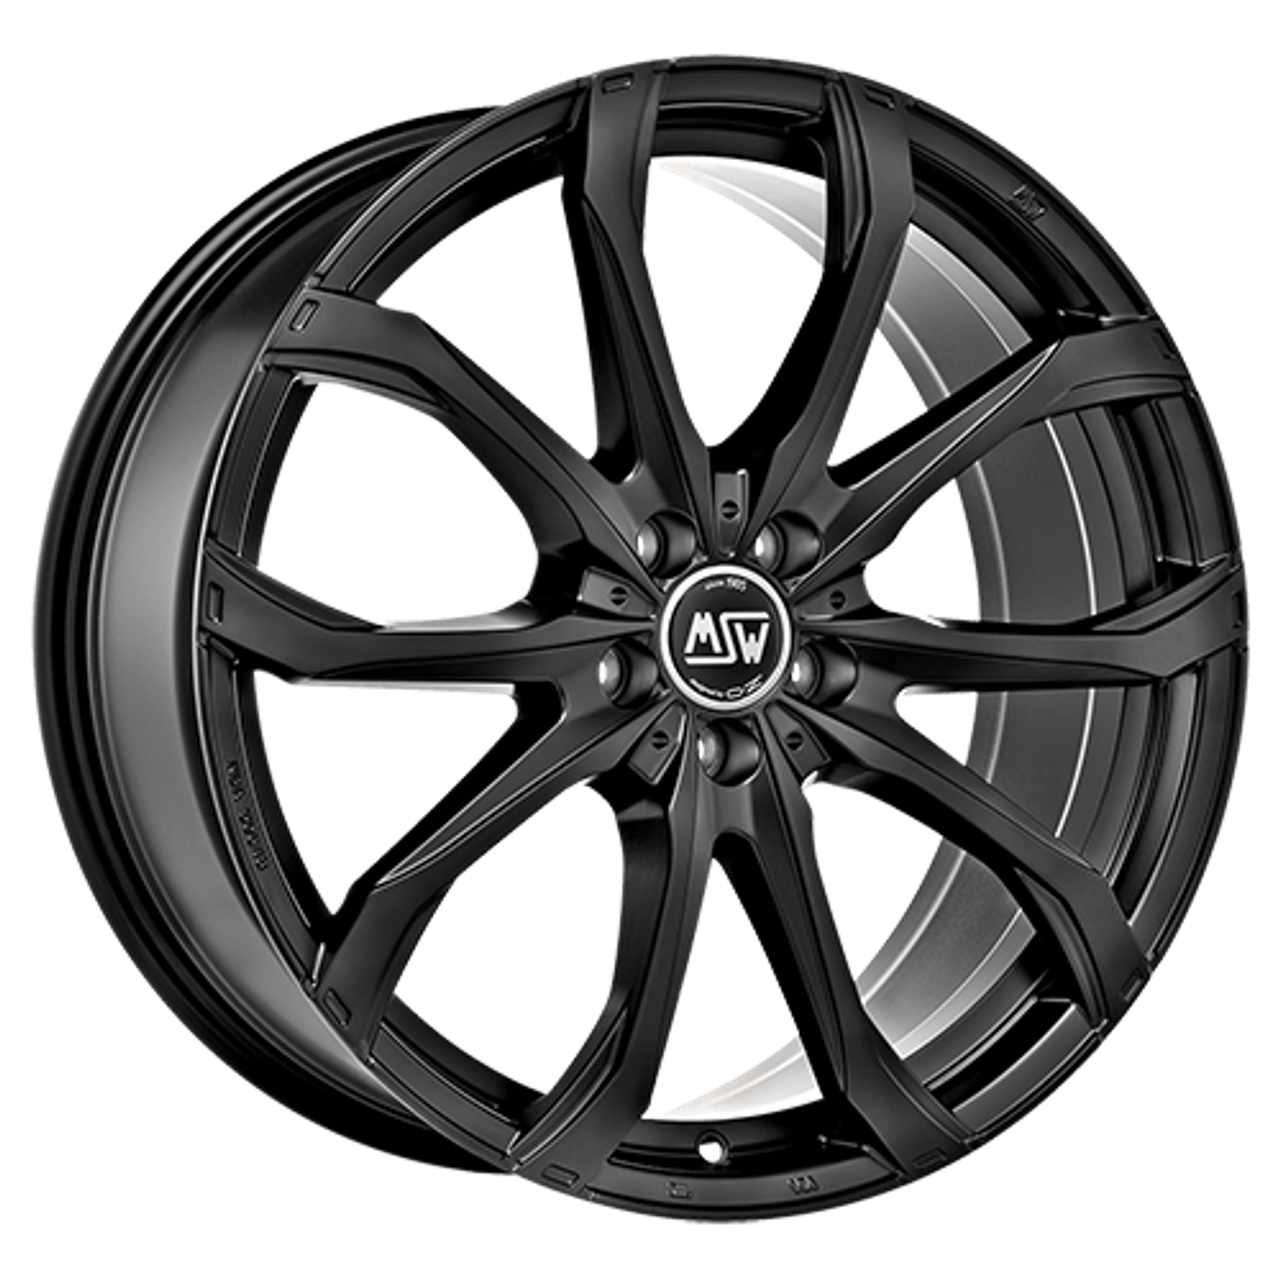 MSW (OZ) MSW 48 gloss black full polished 9.0Jx19 5x130 ET50